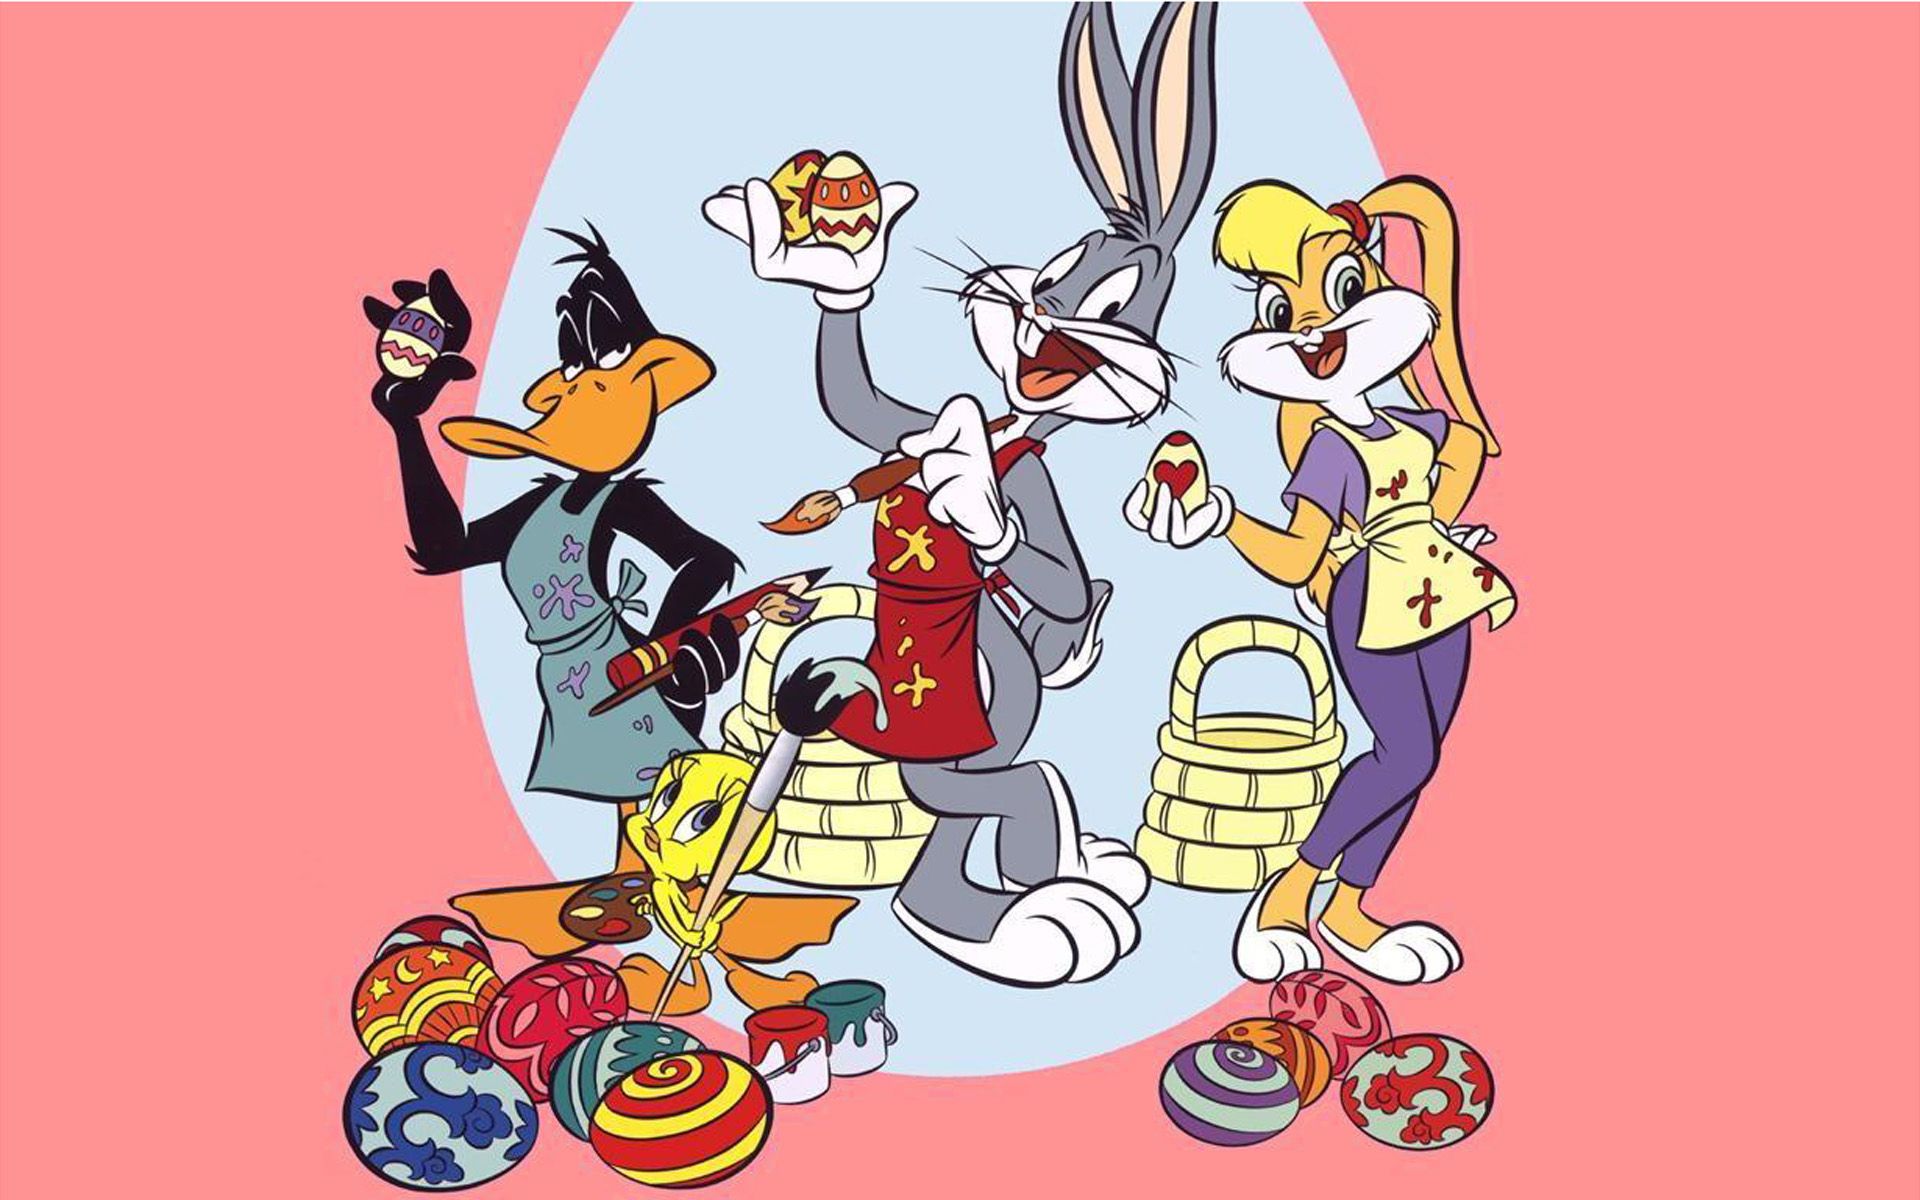 Coloring Easter Eggs Bugs Bunny And Lola Bunny Cartoon Looney.